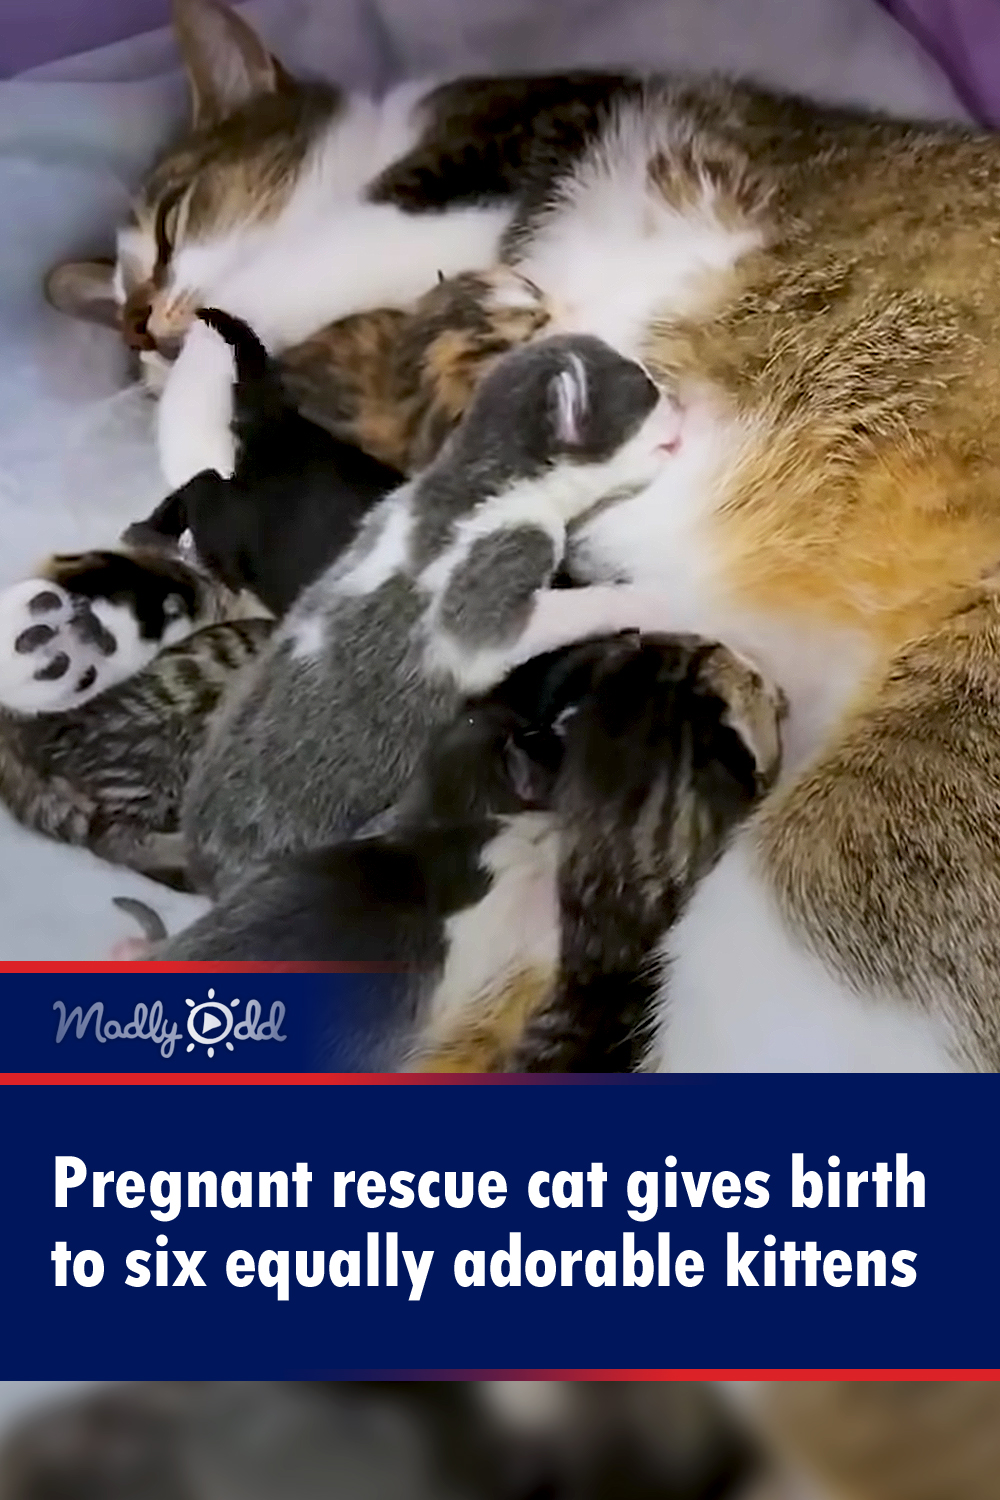 Pregnant rescue cat gives birth to six equally adorable kittens